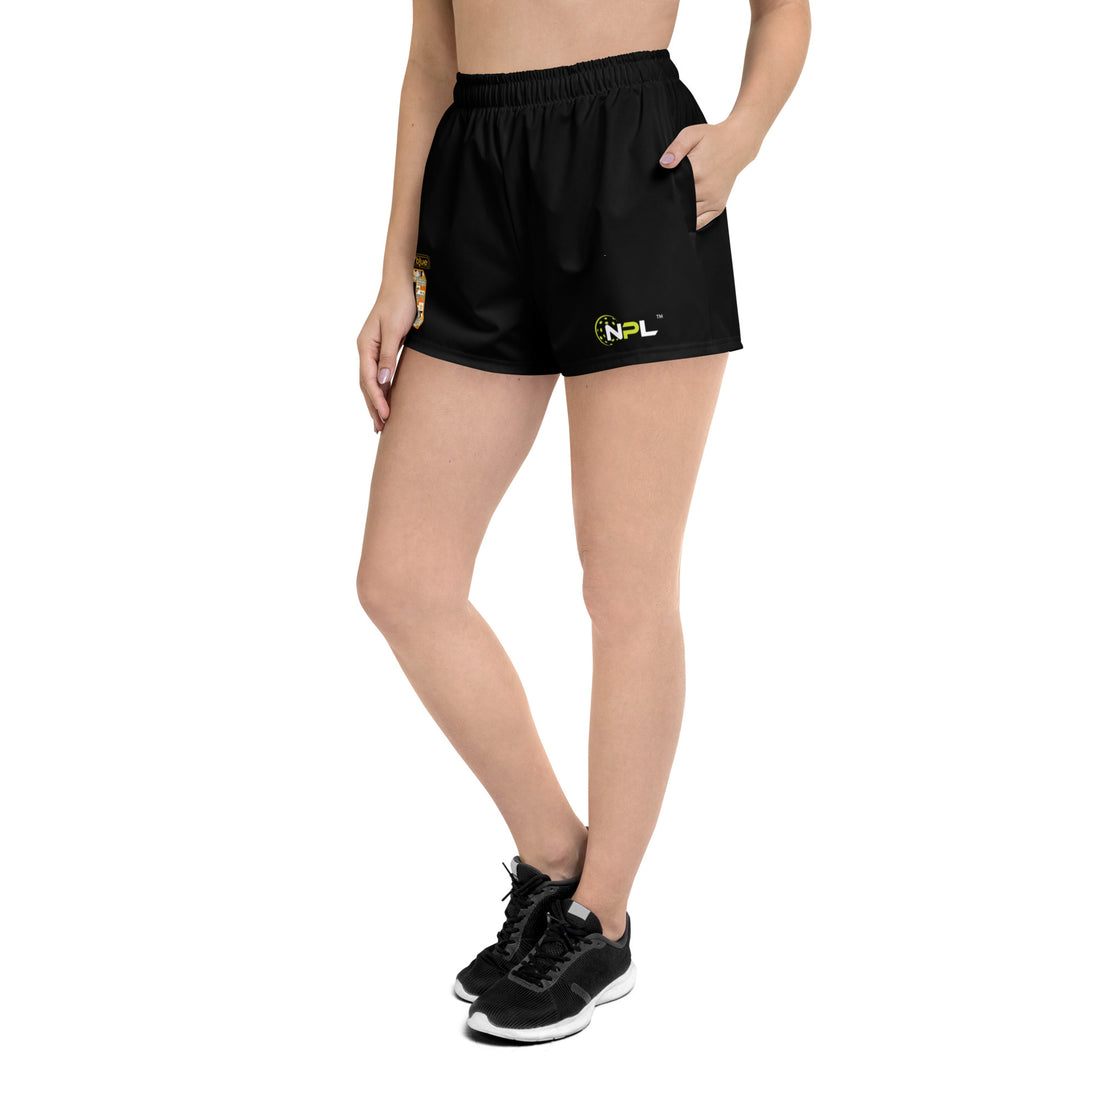 Taylor Taylor 0 Austin Ignite™ SKYblue™ 2023 Authentic Women's Shorts - Black